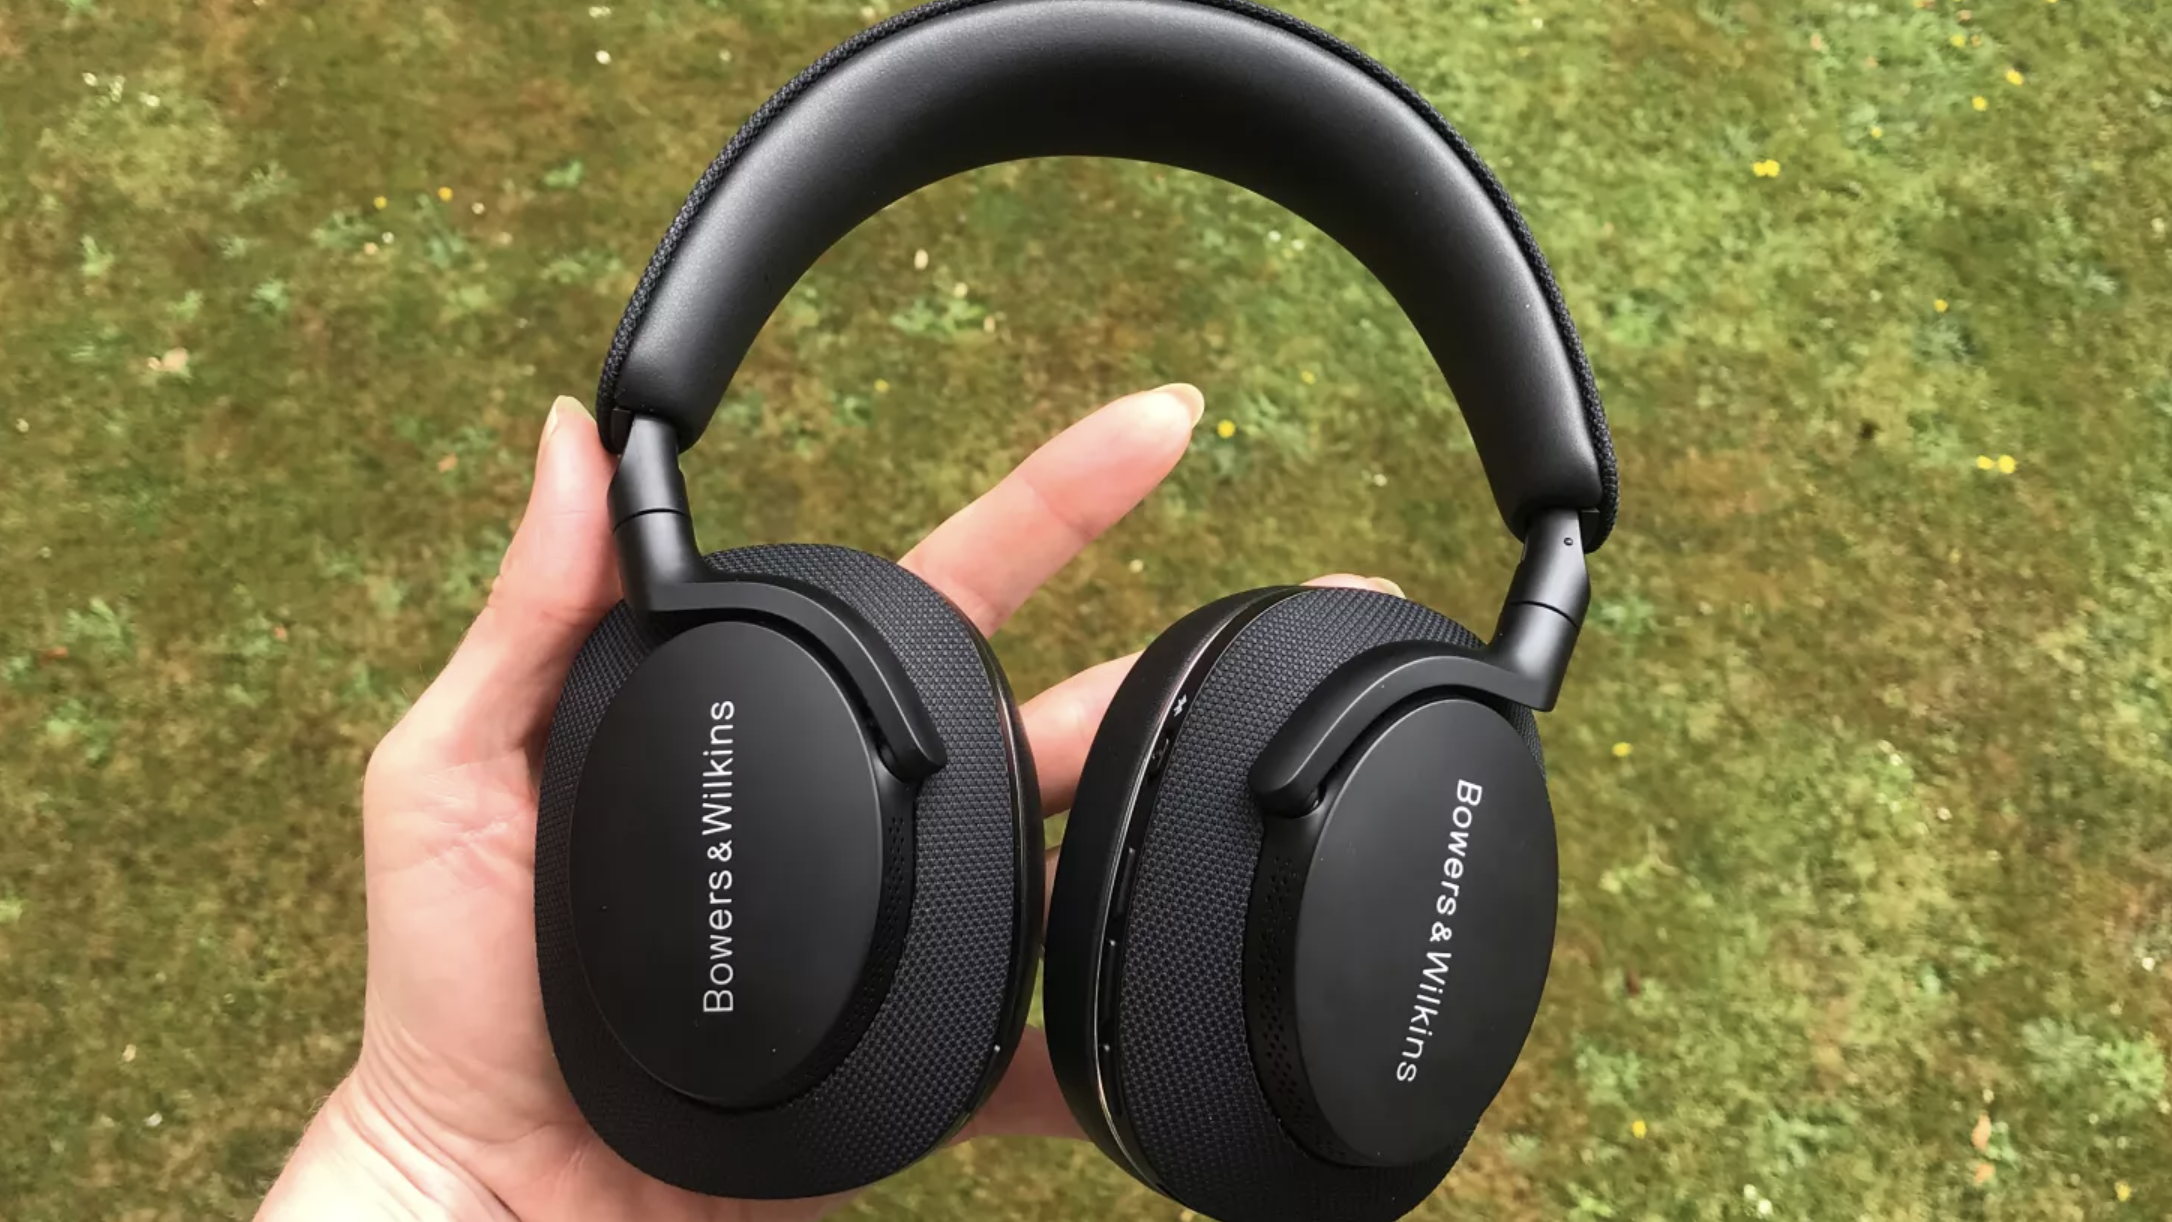 The Bowers & Wilkins PX7 S2 headphones on a grass surface